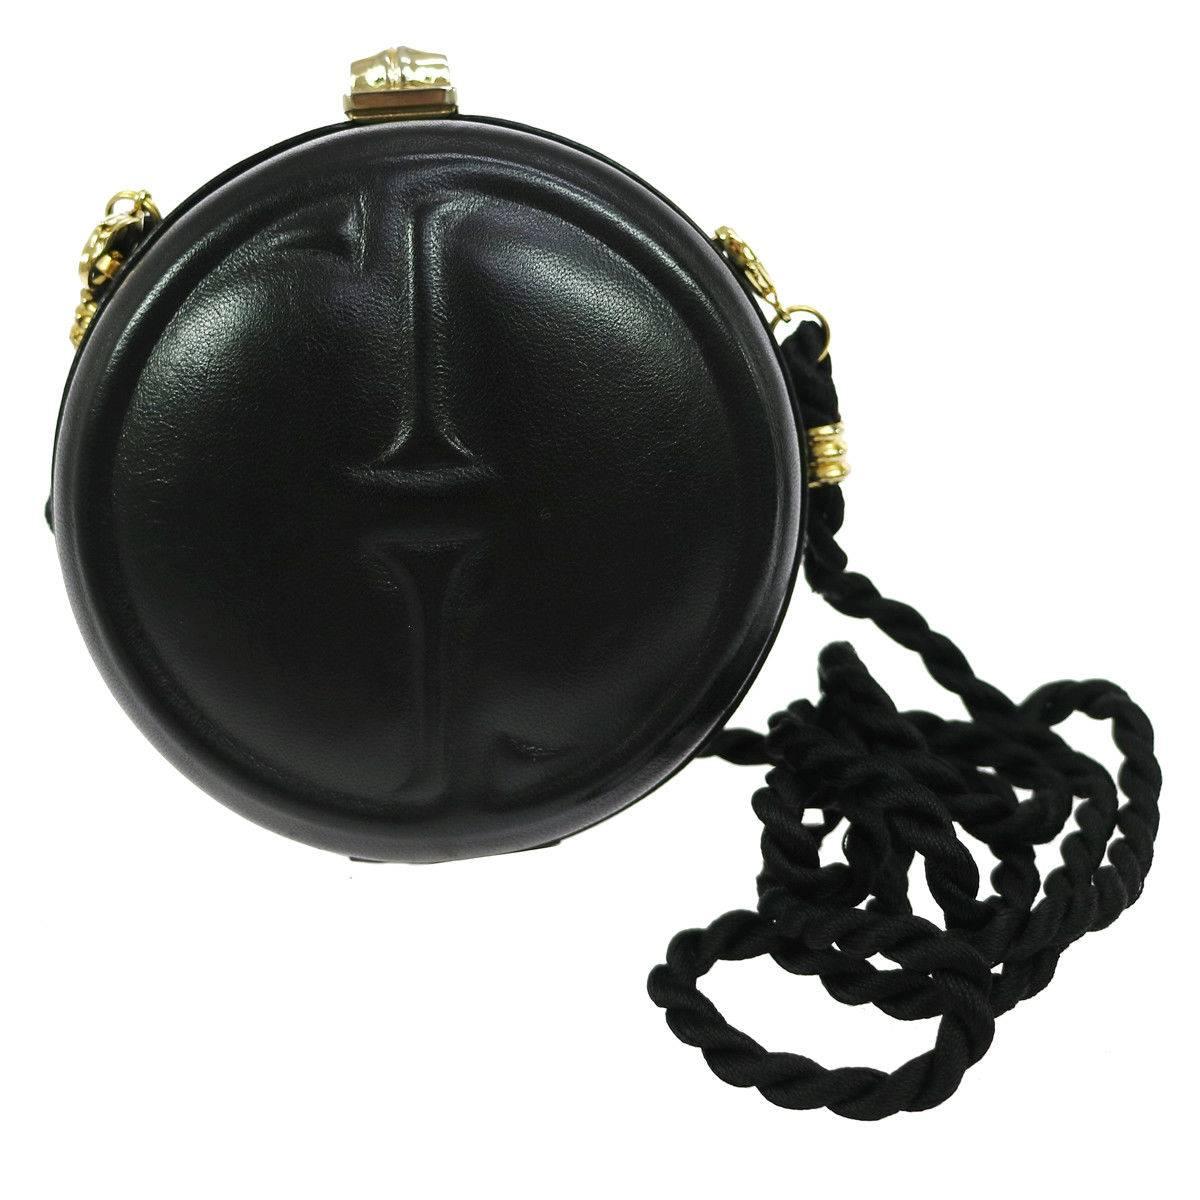 Gucci Black Leather GG Bamboo Kisslock Round 2 in 1 Evening Clutch Shoulder Bag